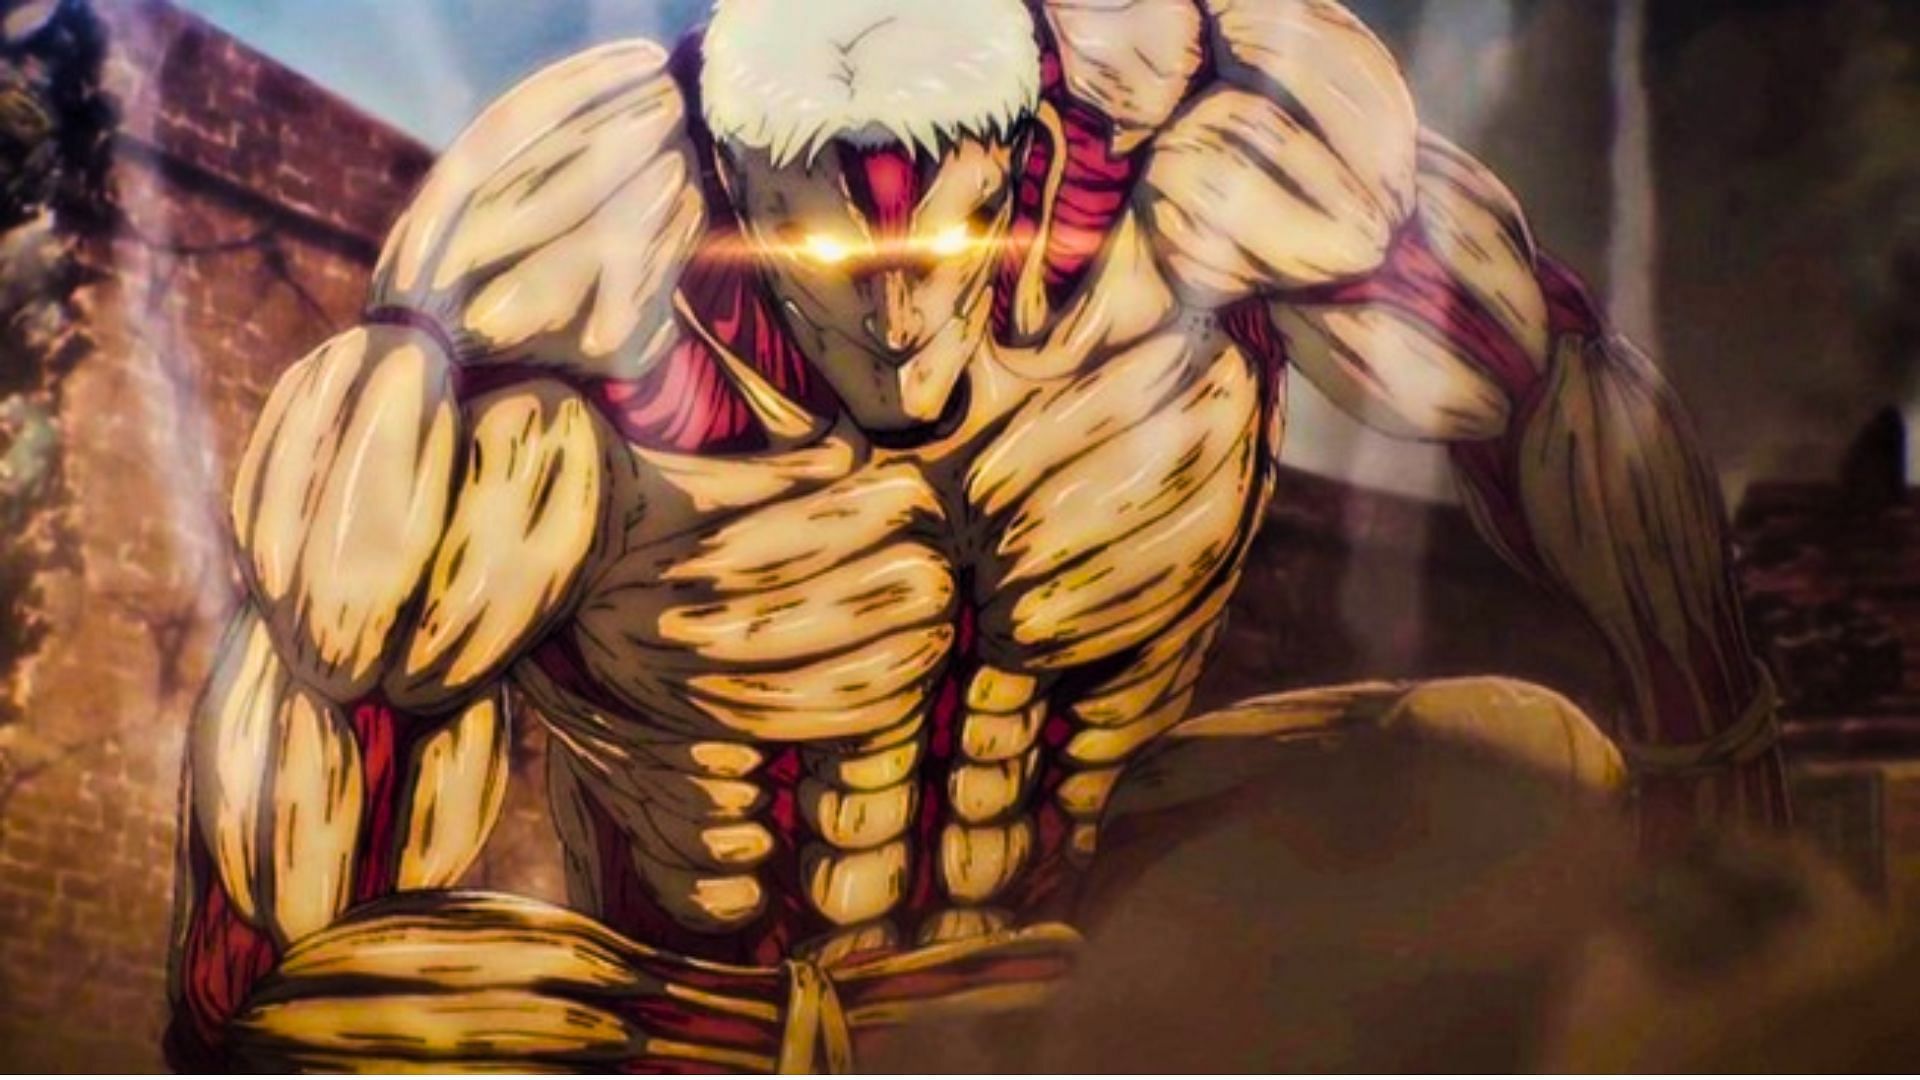 Malaysian government censors Attack on Titan in the worst possible way (Image via Mappa)